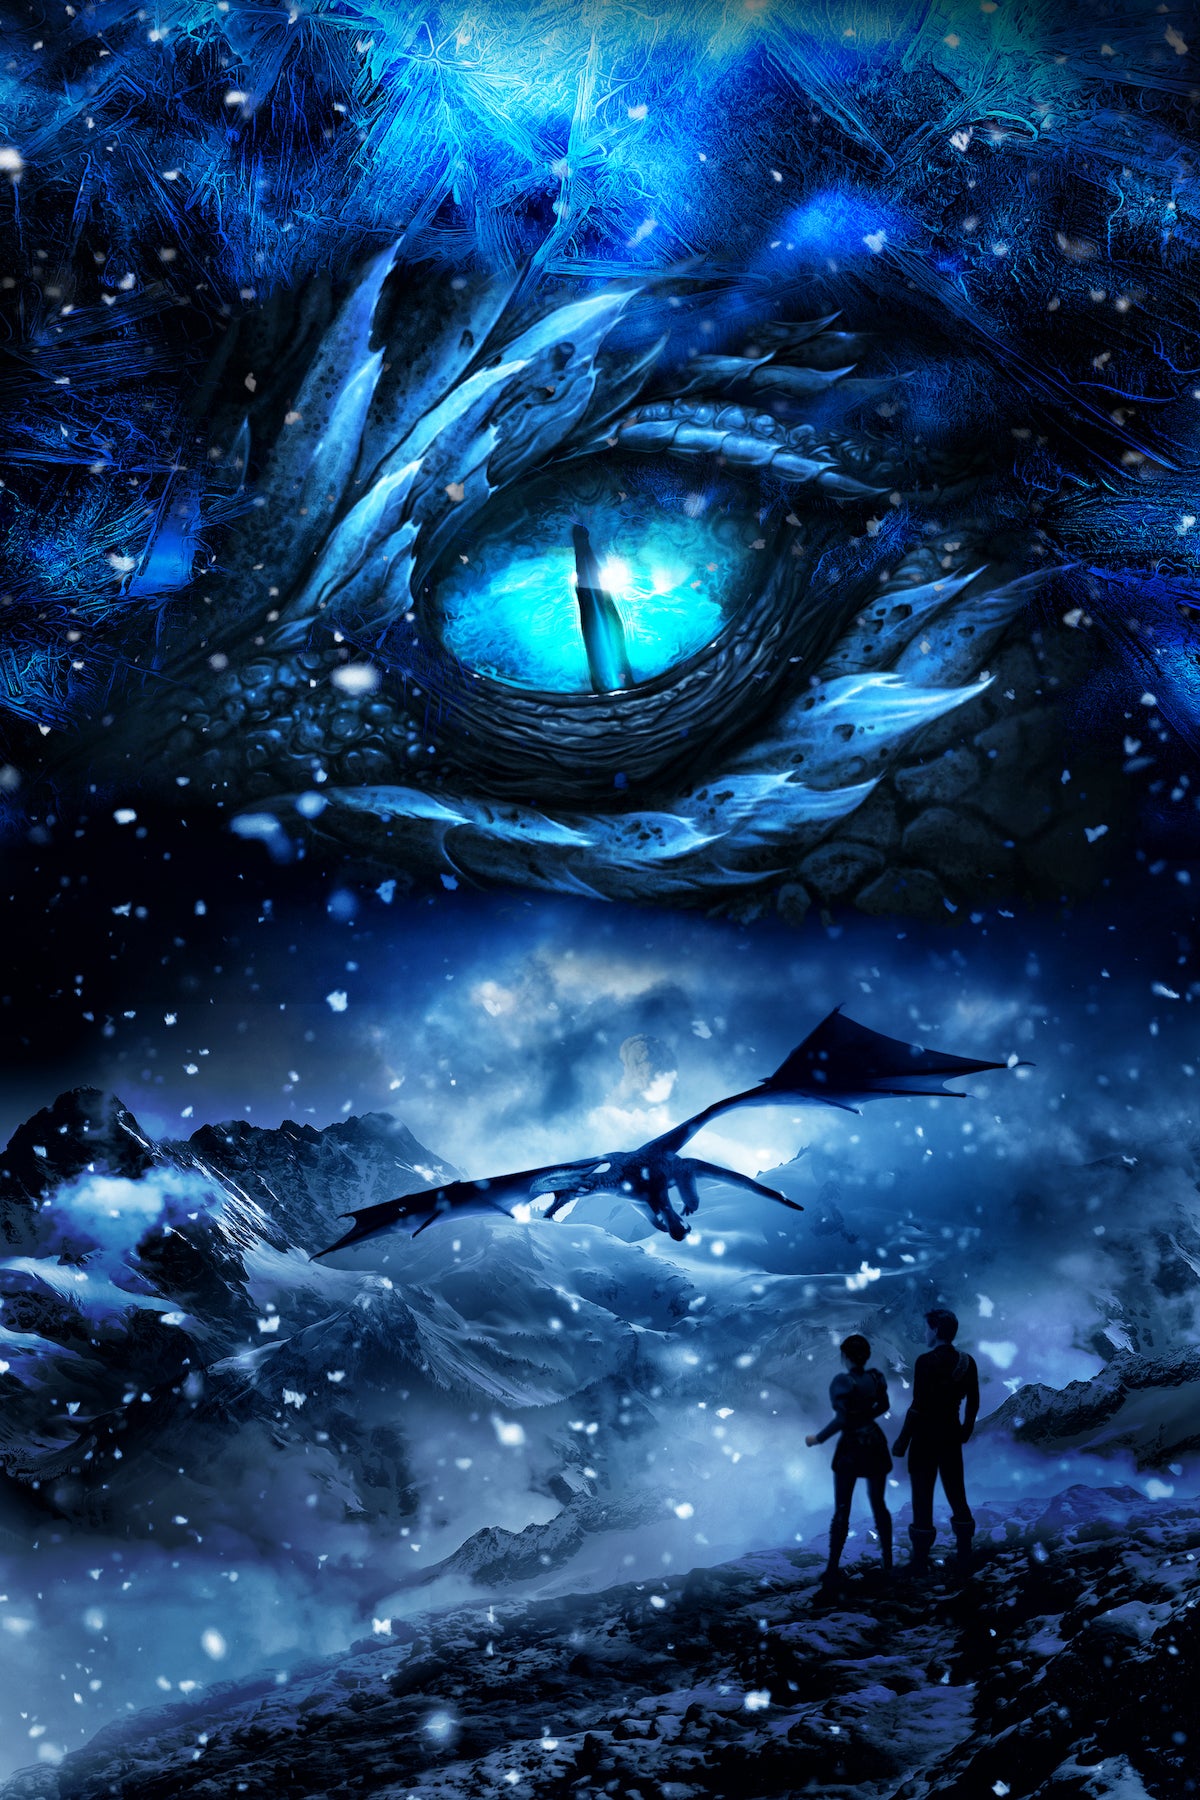 The artwork from the cover of Frostsight. Artwork features a blue dragon eye at the top. Below the eye, the two main characters watch a dragon in the distance in a snowy mountain landscape.